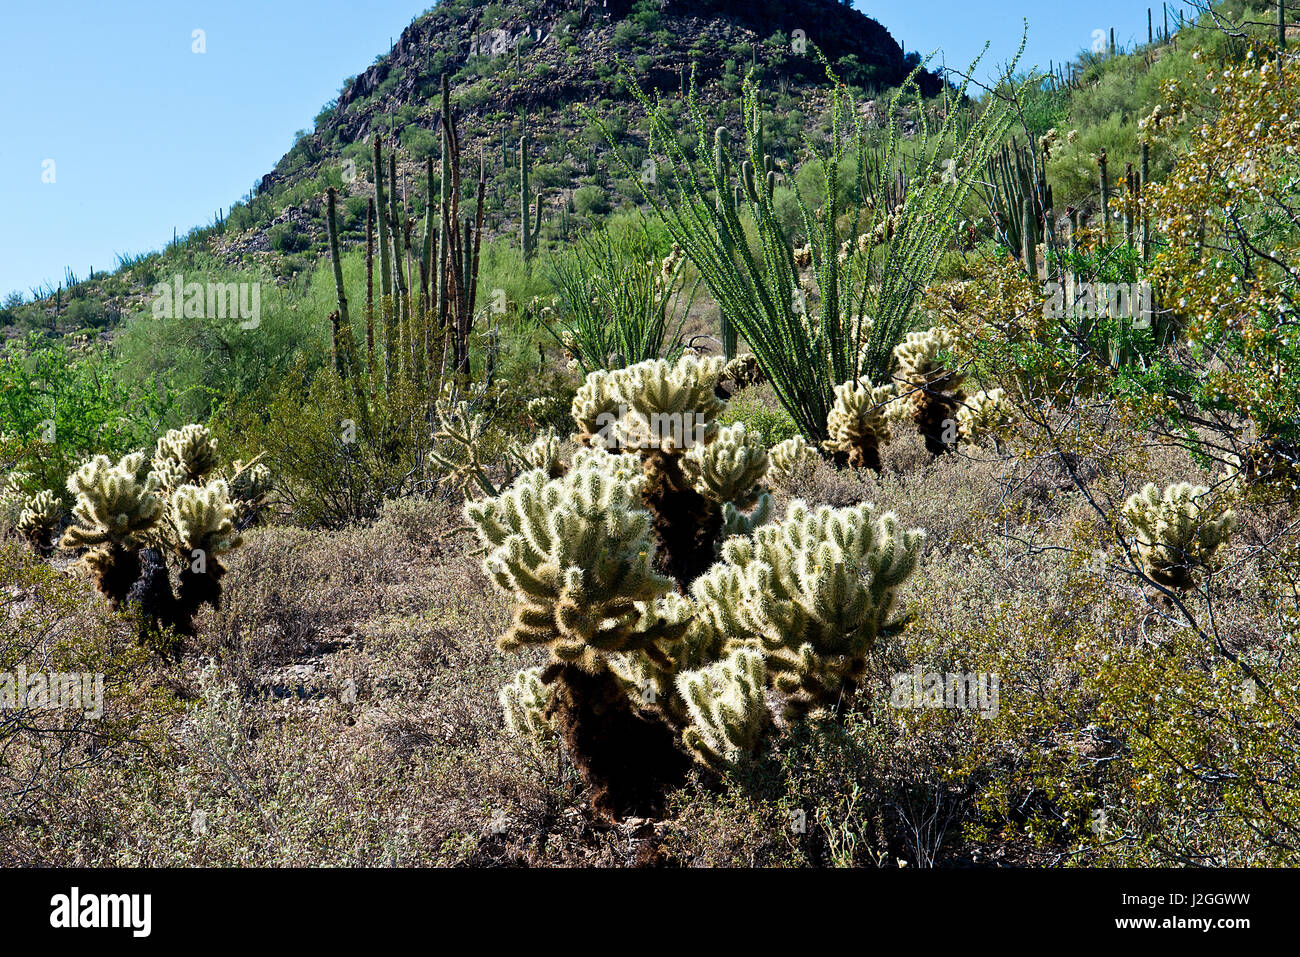 USA, Arizona, Organ Pipe Cactus National Monument, Sonoran Desert, Cholla Cactus Specimen on the Ajo Mountain Drive (Large format sizes available) Stock Photo